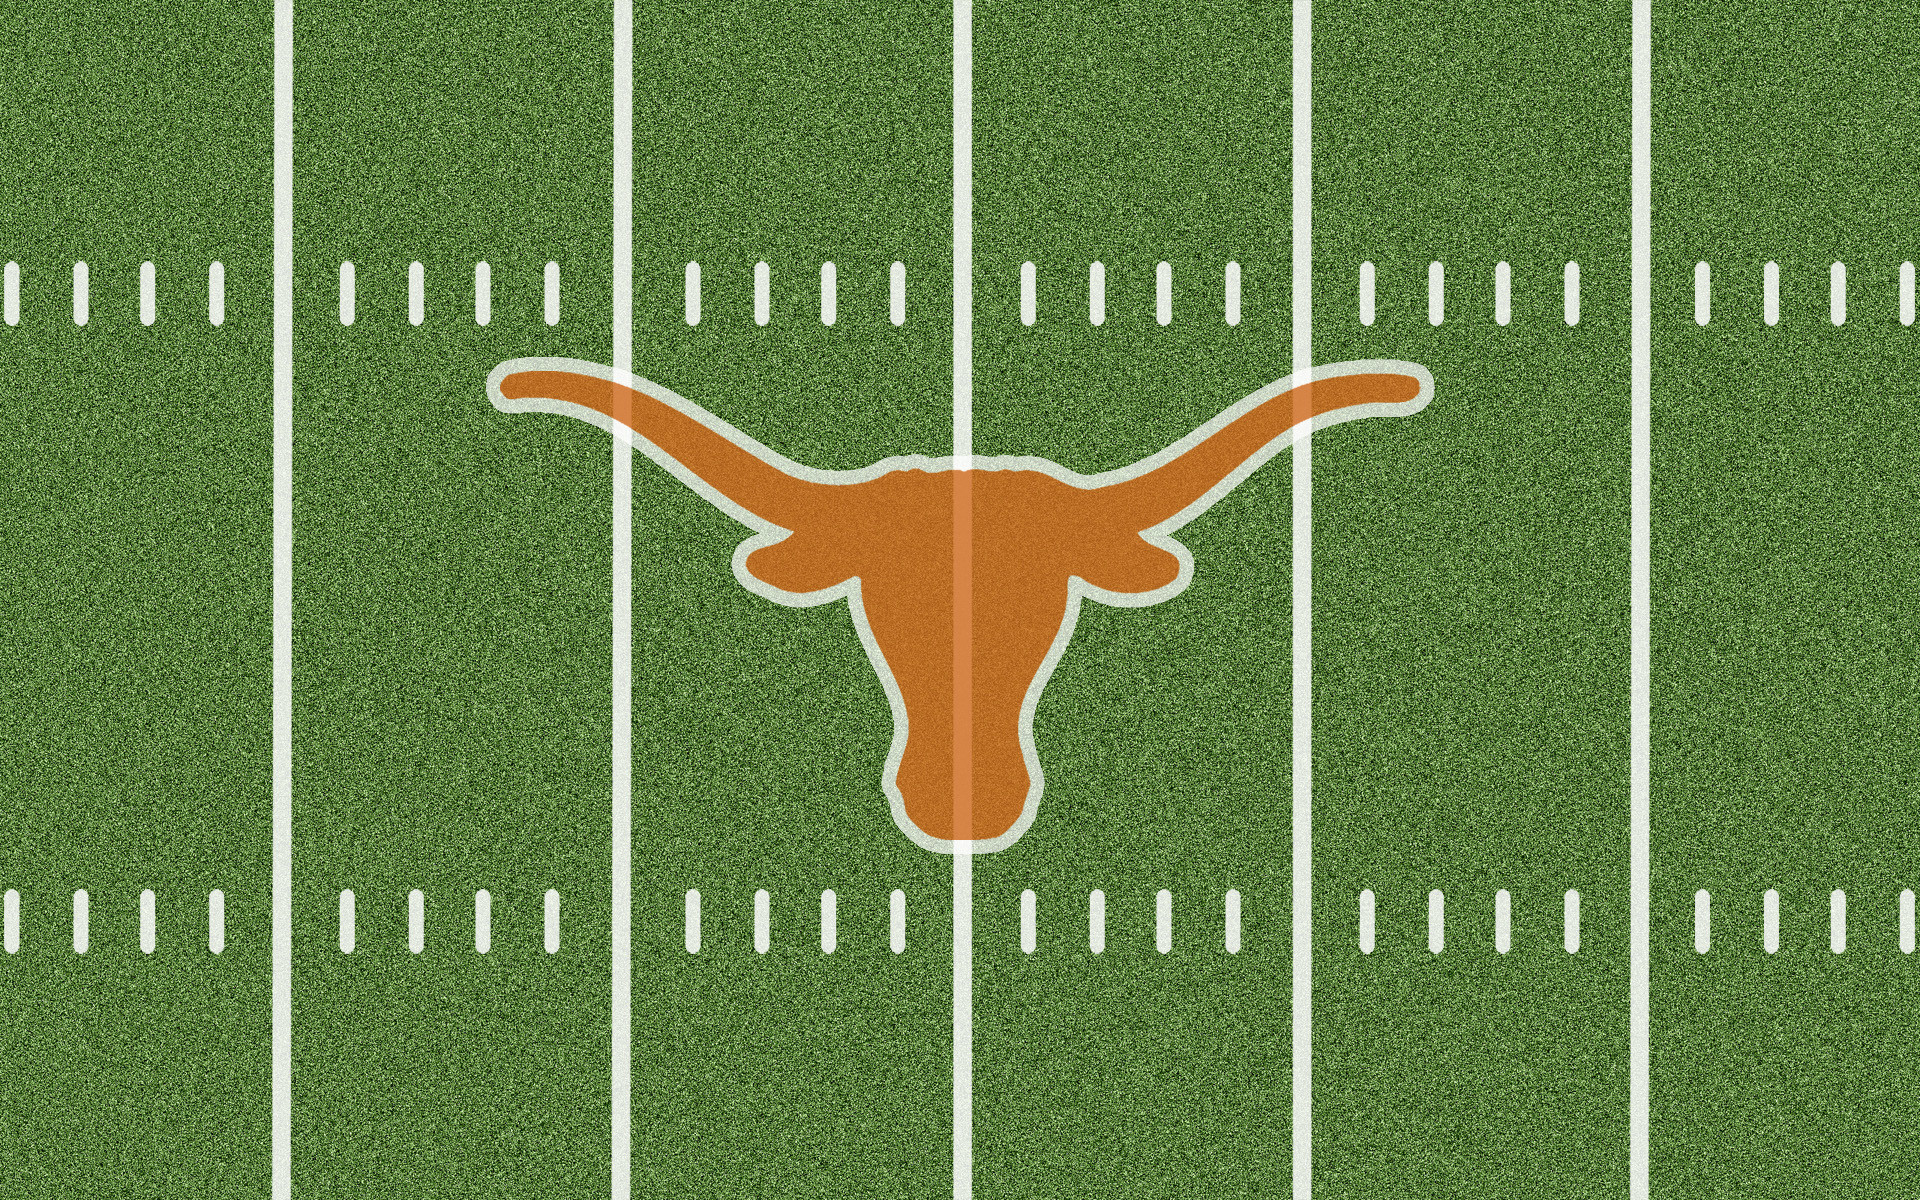 1920x1200 Texas Longhorns Iphone Wallpaper Wallpapers texas longhorns image and .